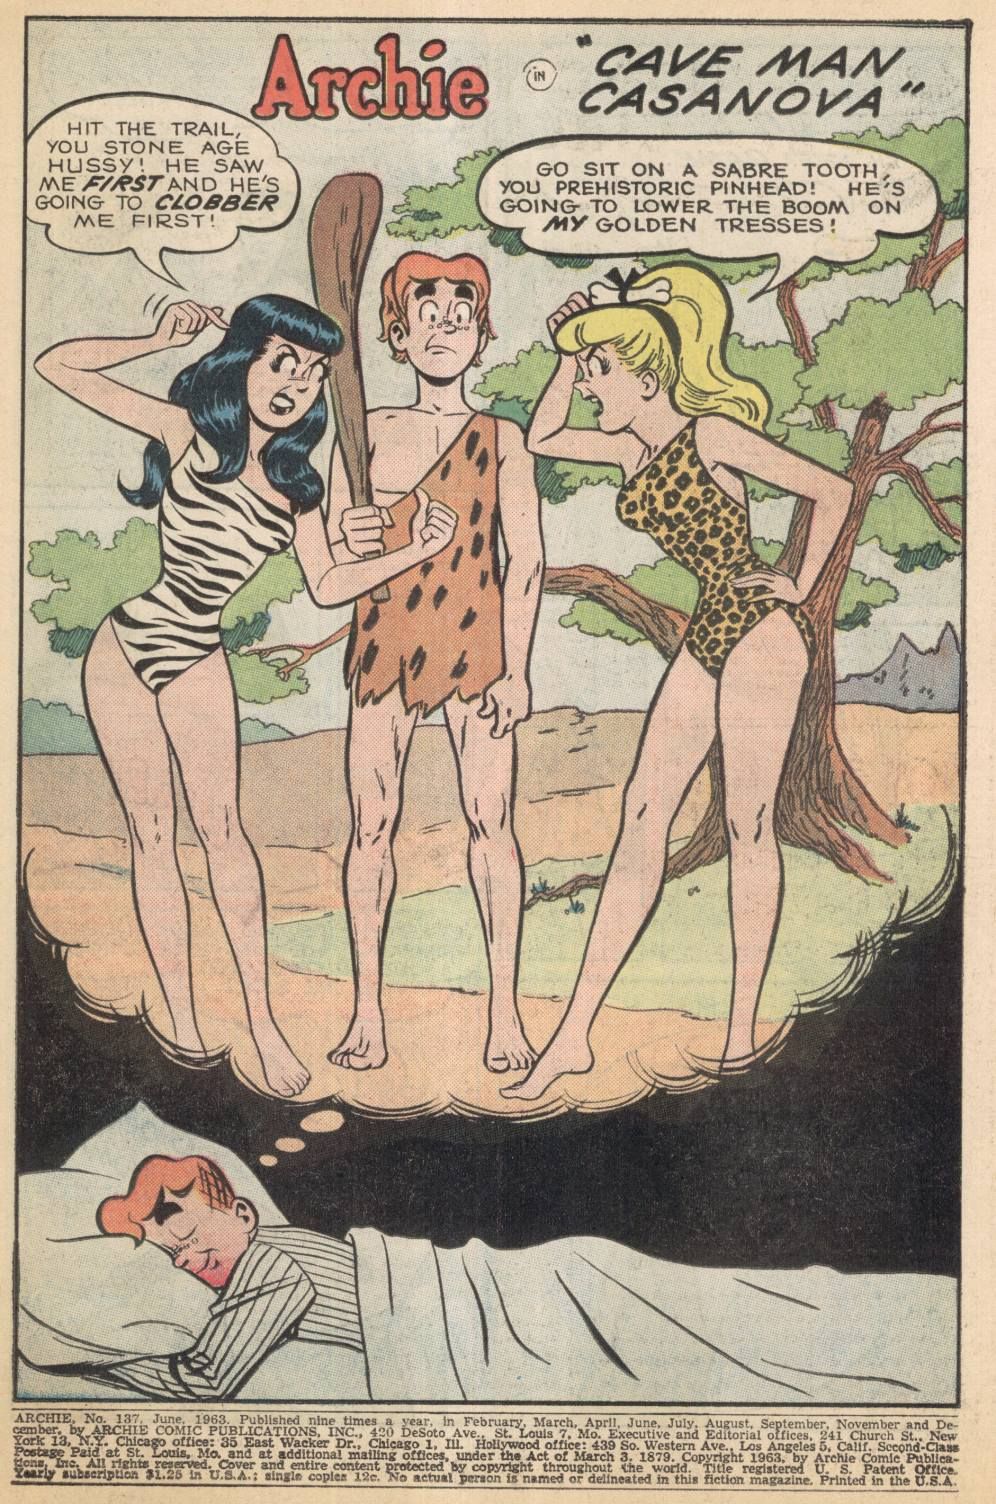 Archie dreams of himself as a caveman